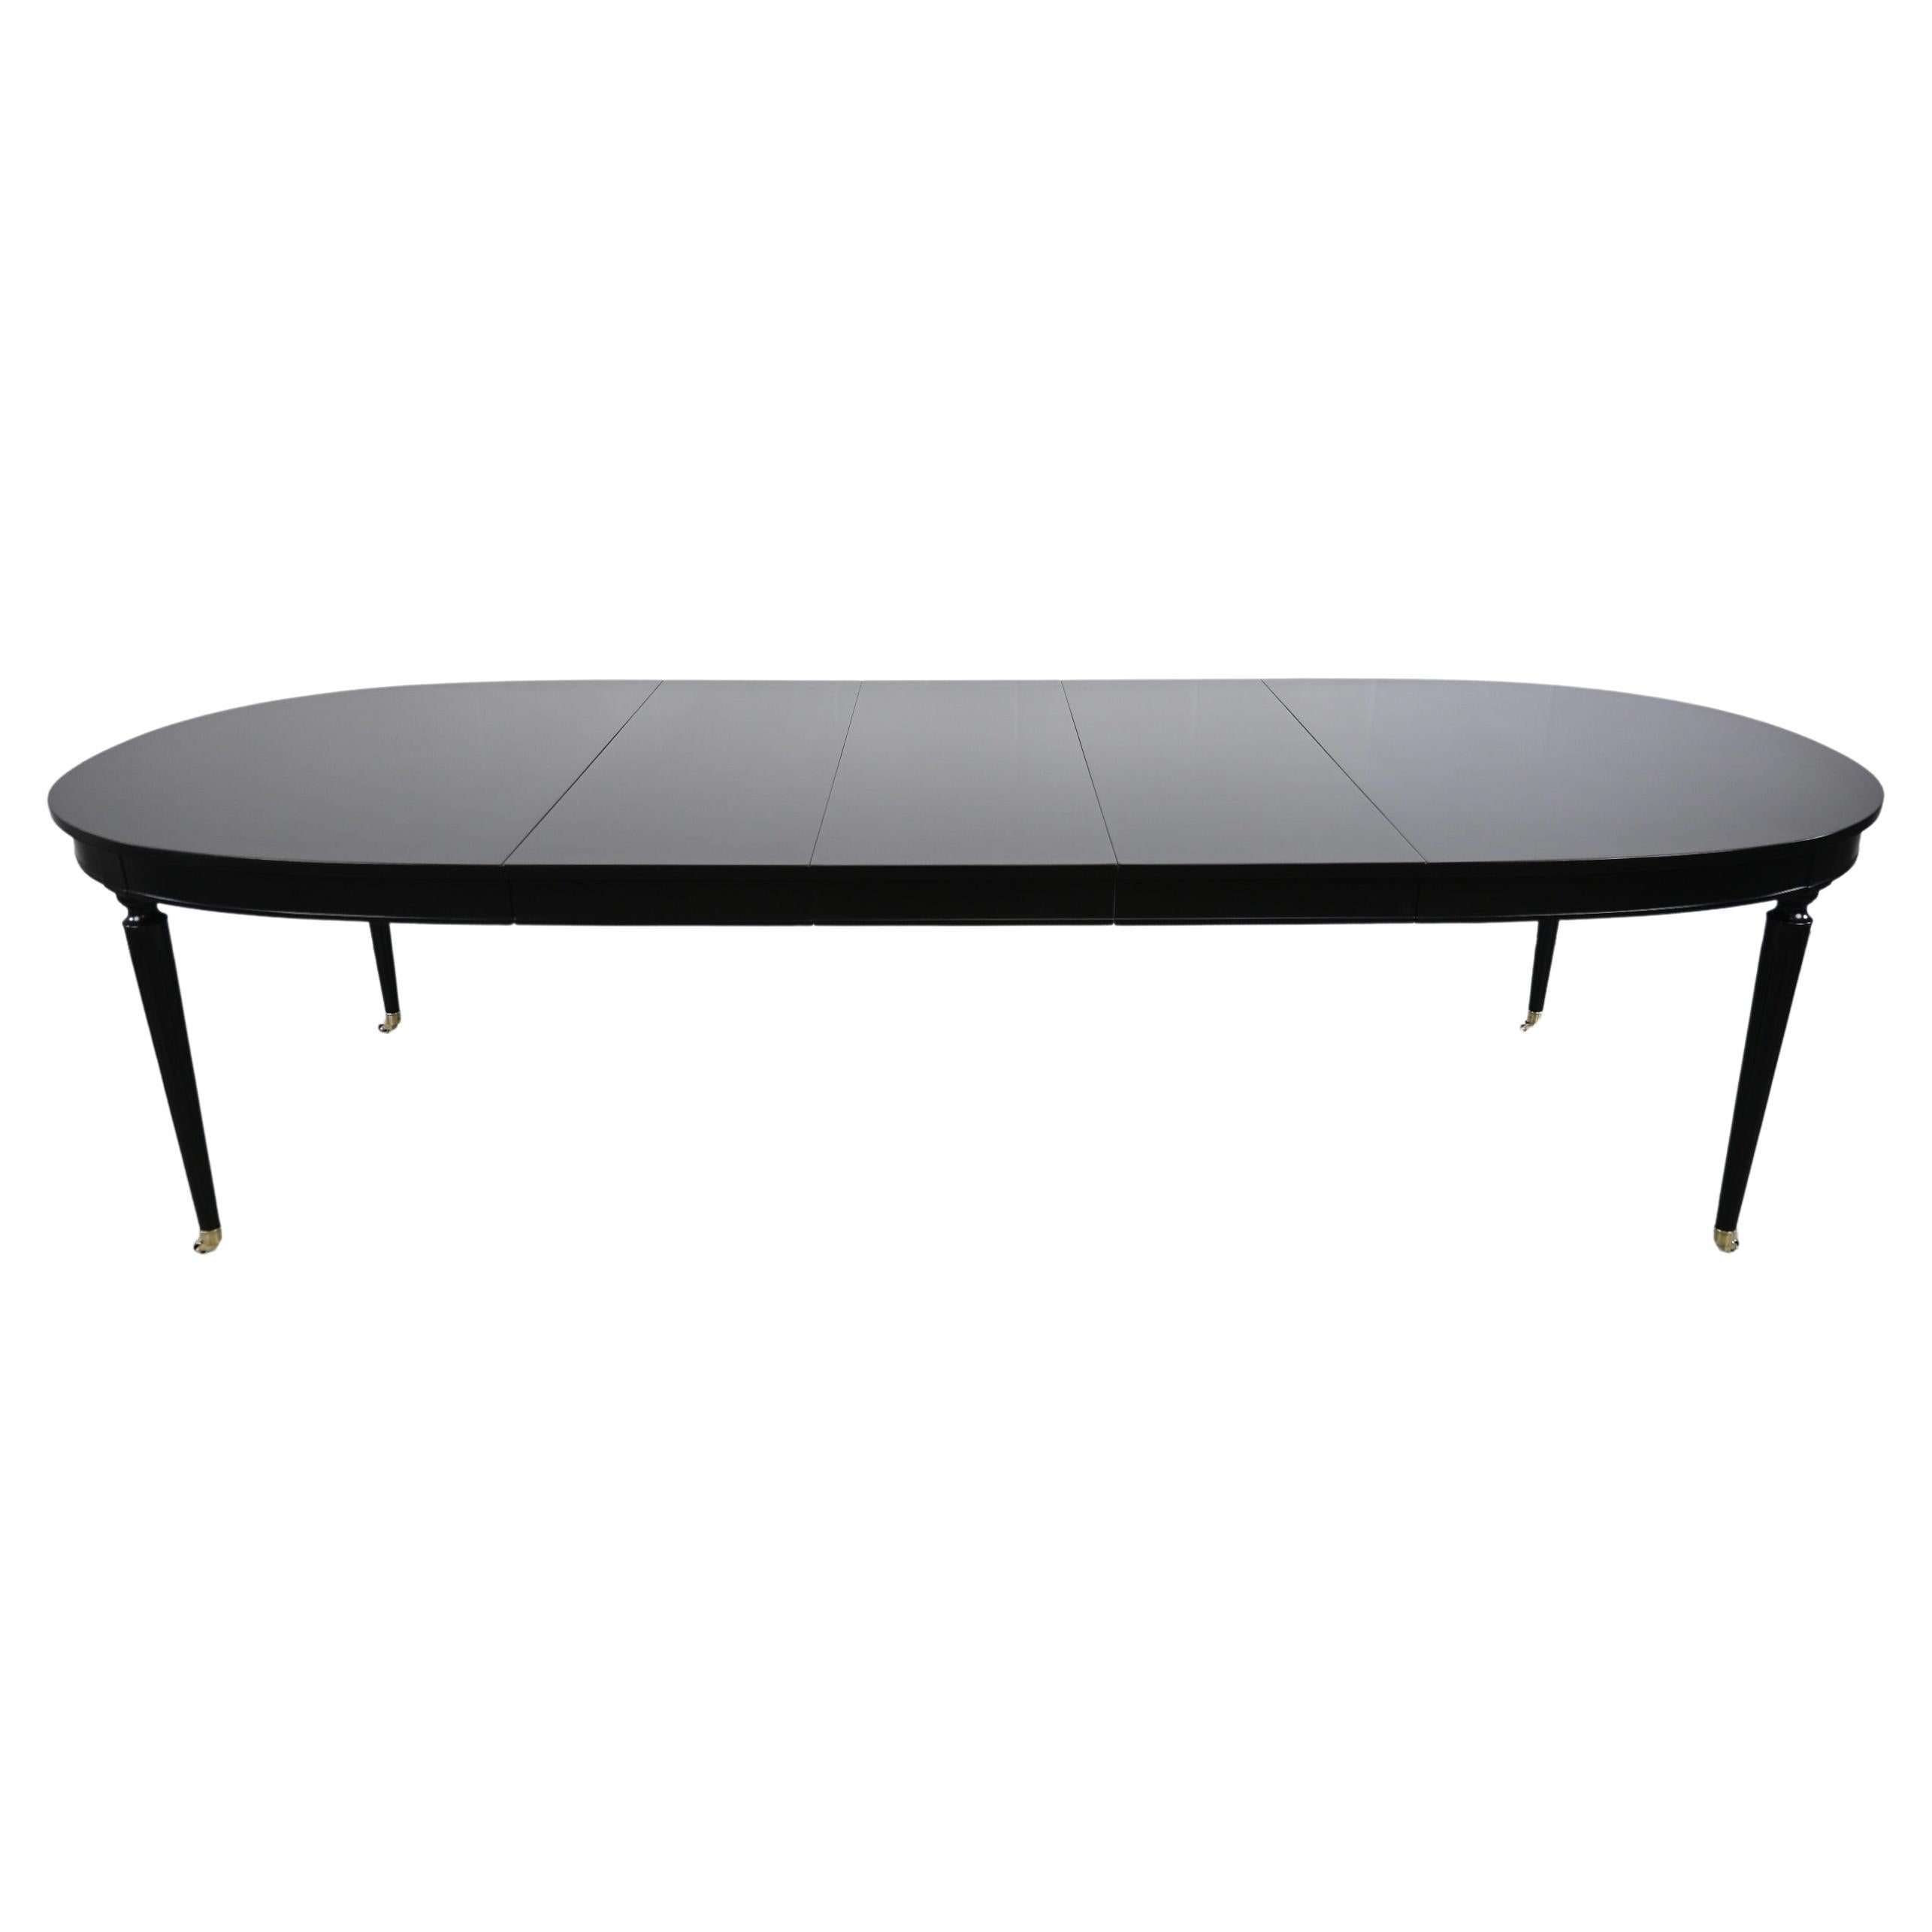 Kindel Furniture Black Lacquered French Regency Extension Dining Table